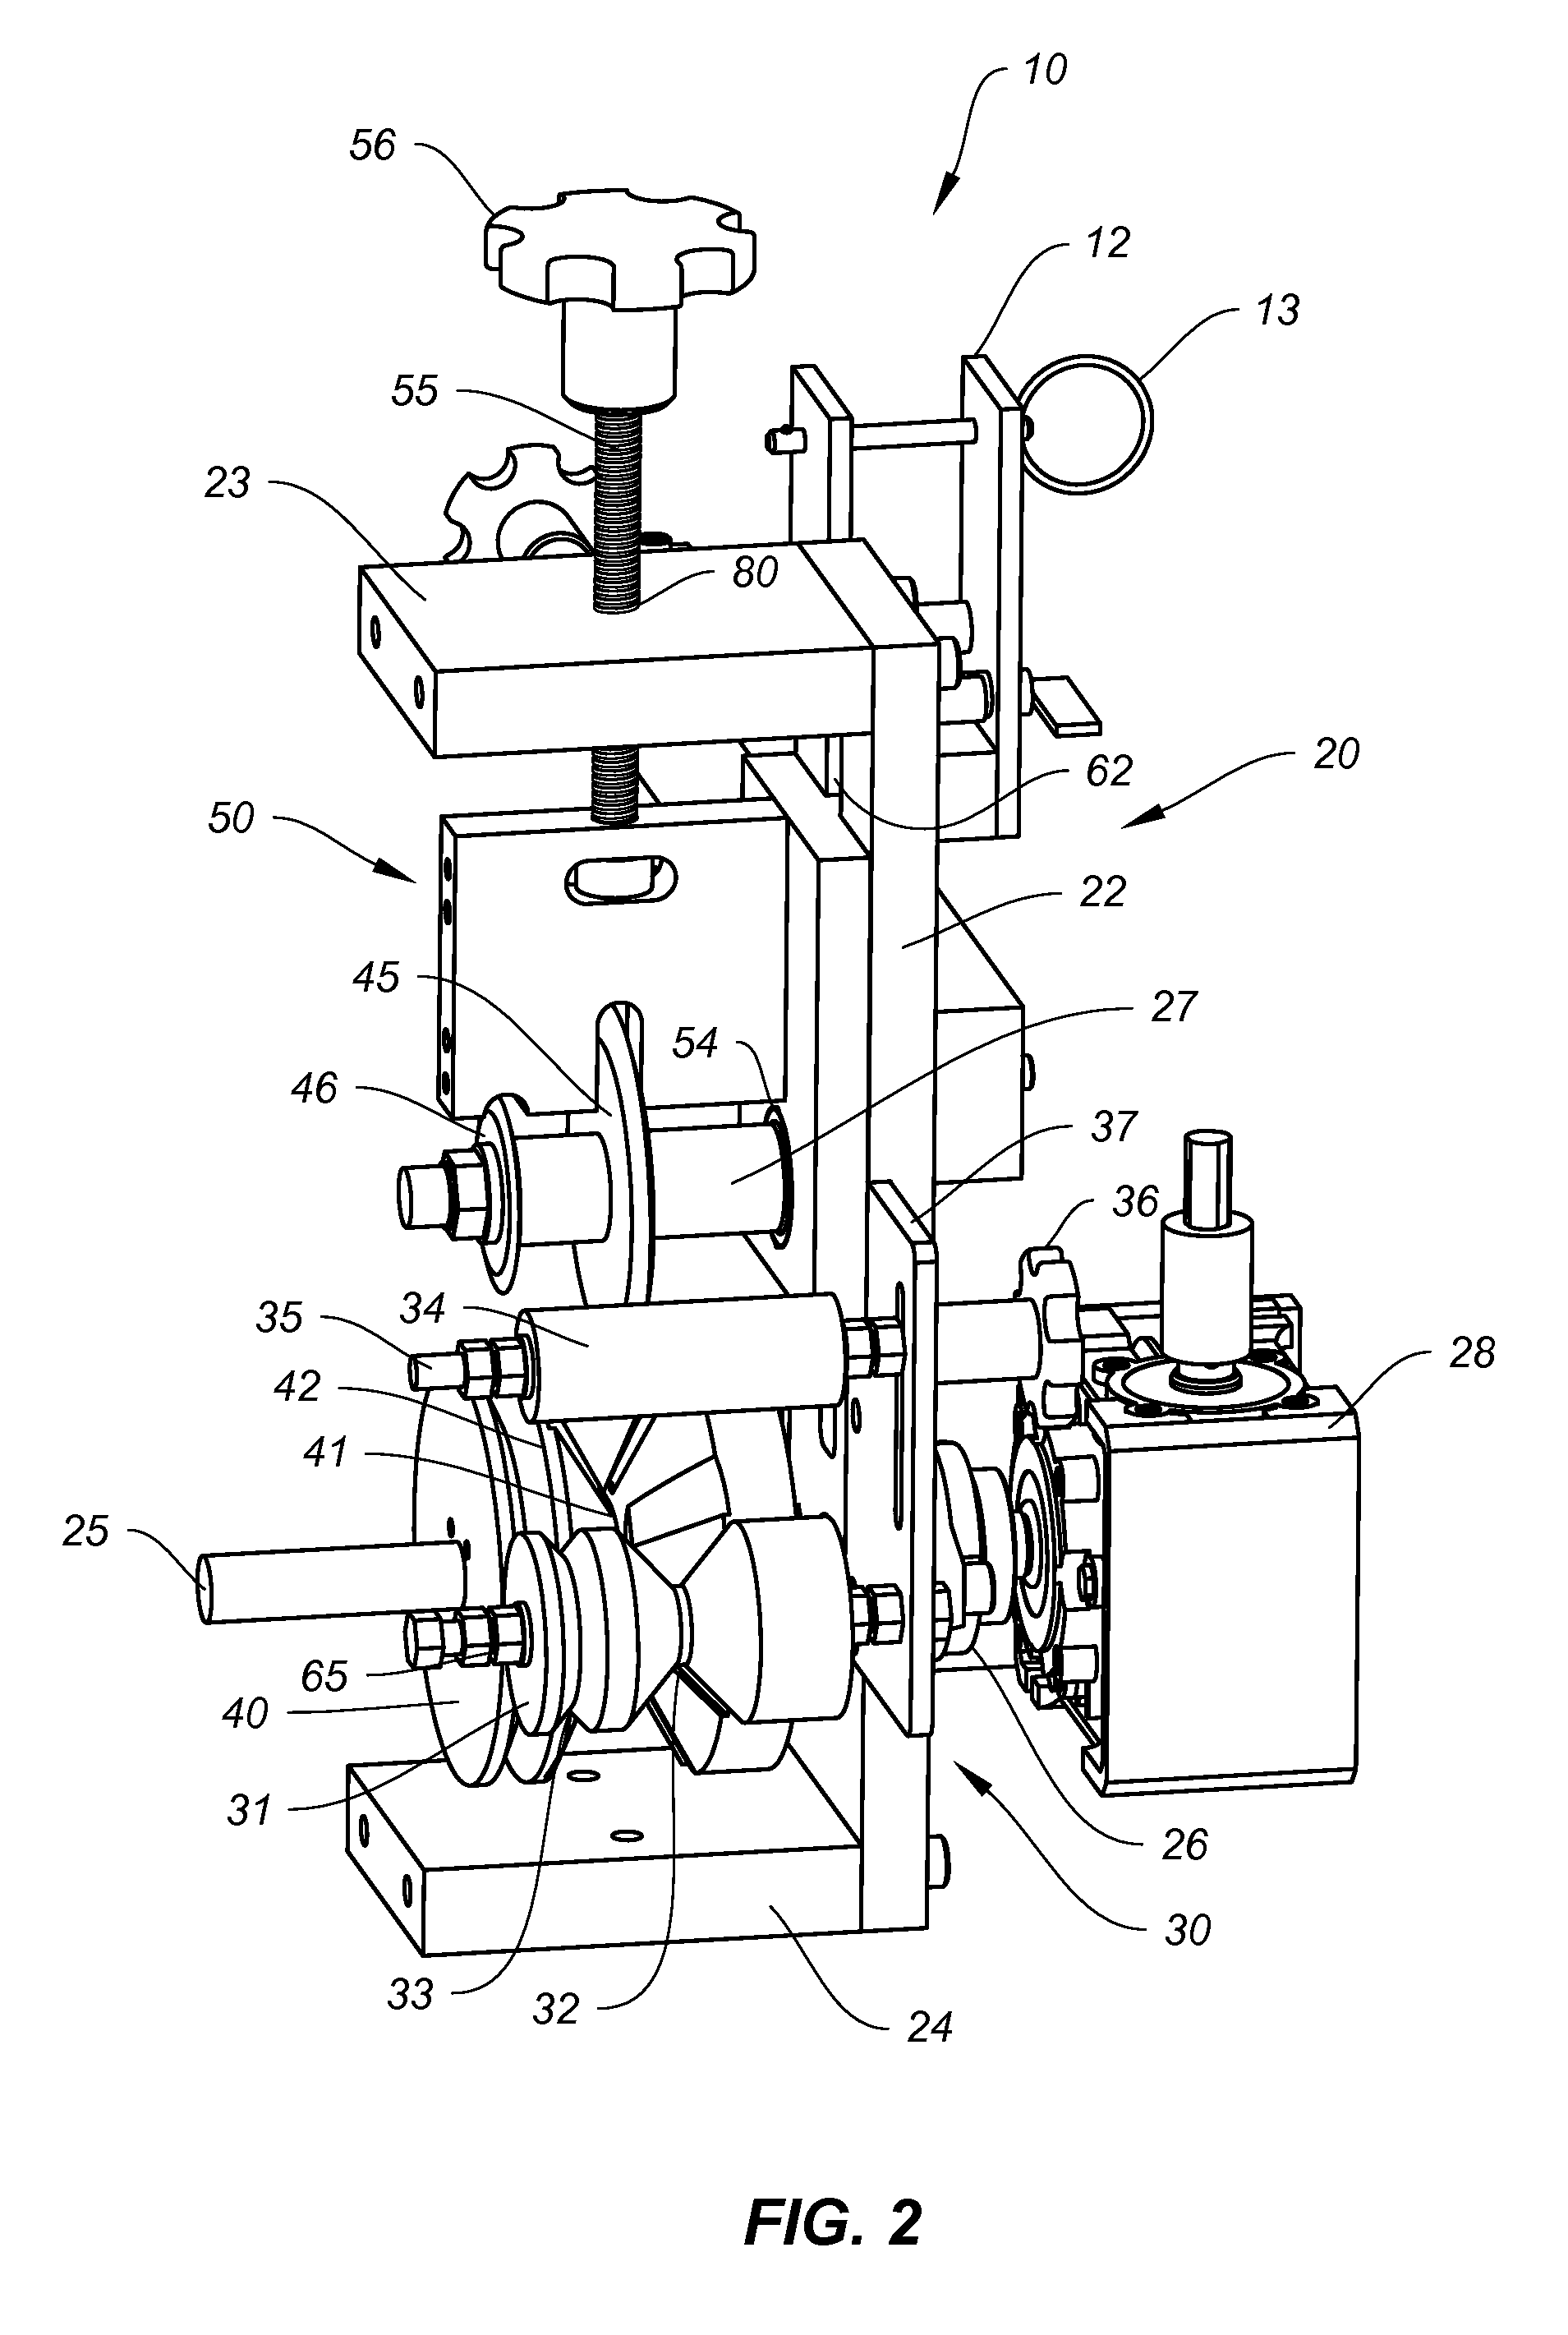 Apparatus and Method for Stripping Insulation Lengthwise fom Electrical Wires and Cables